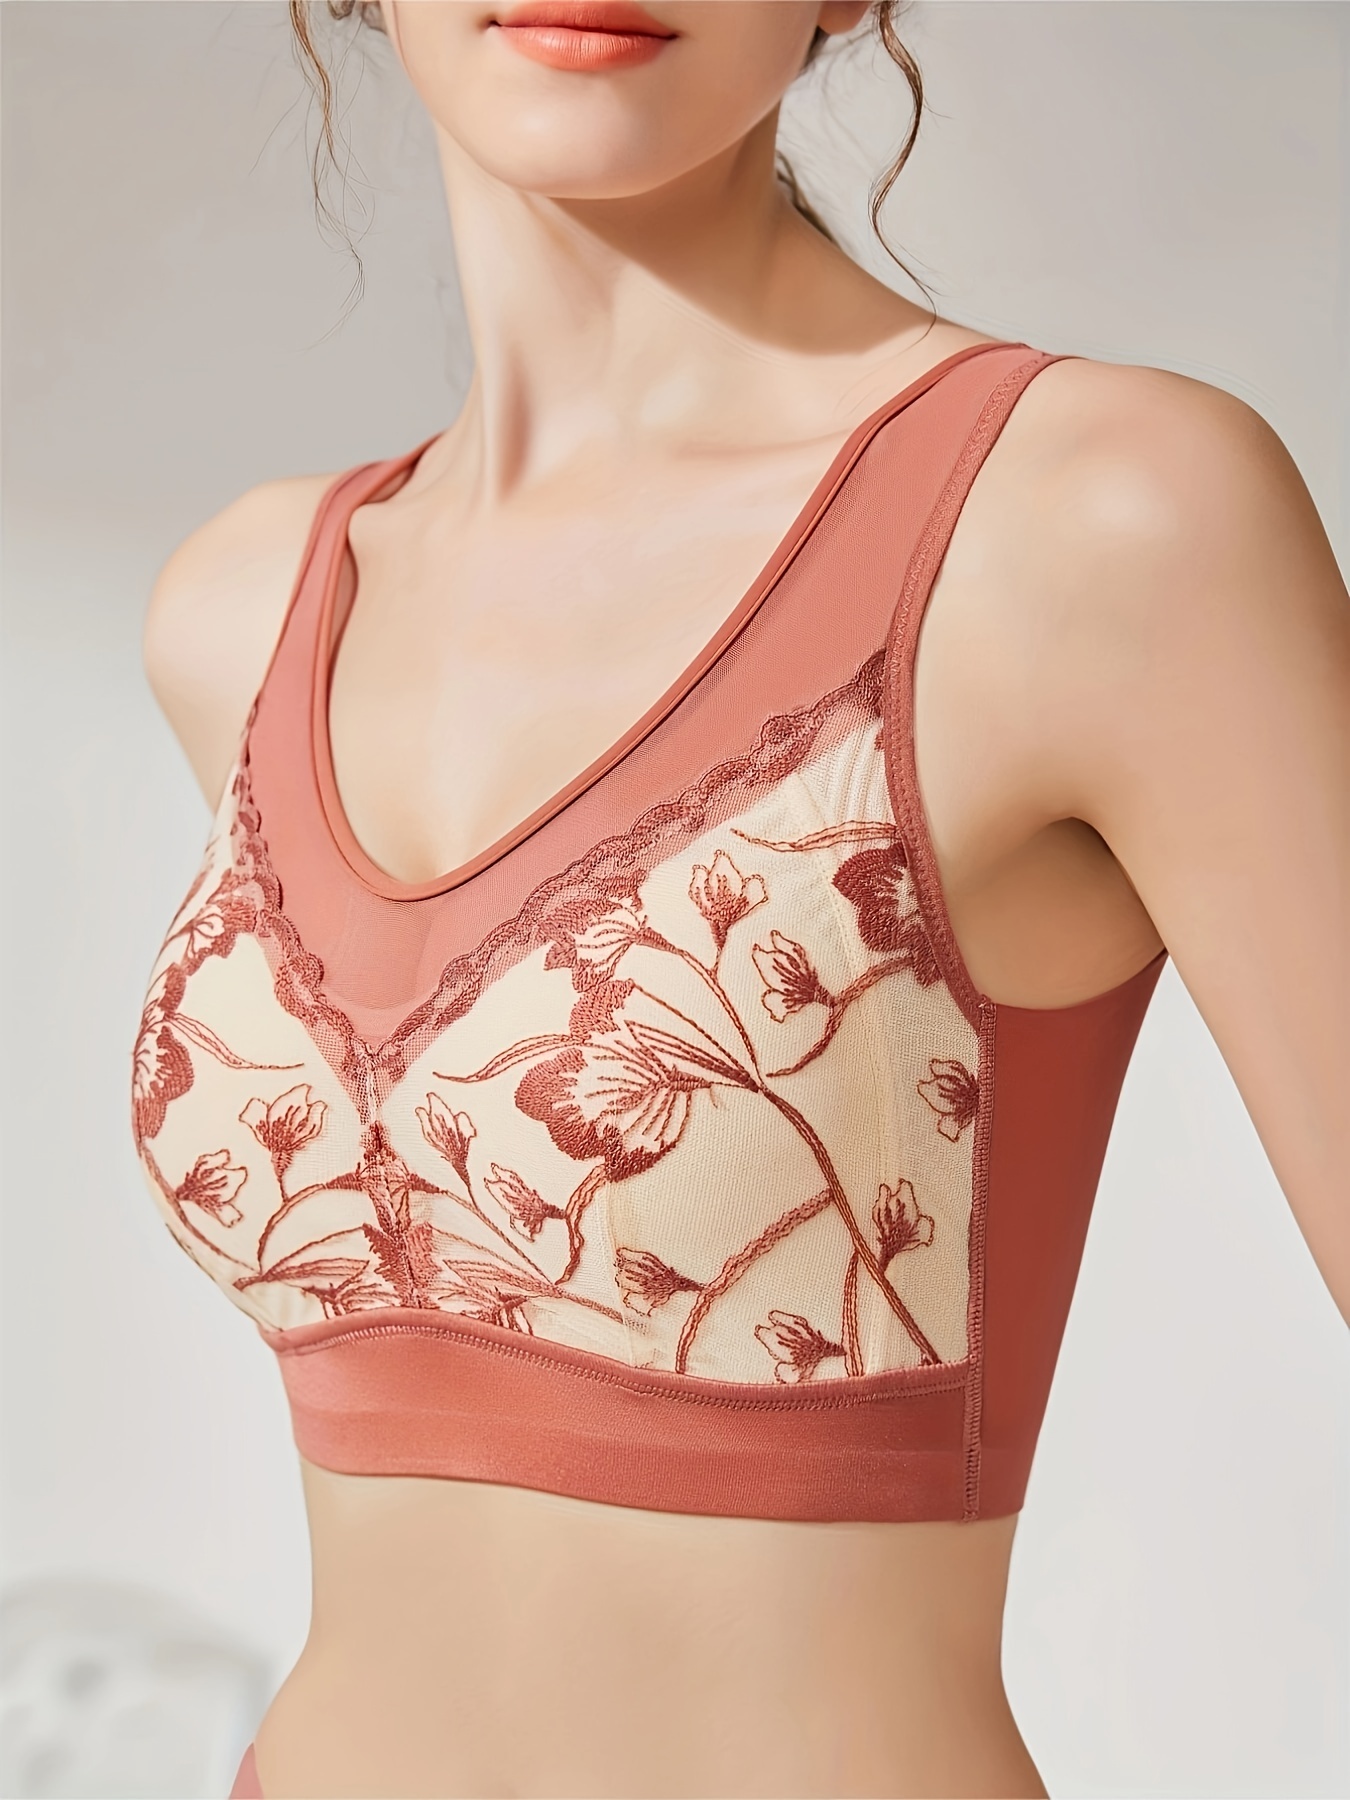 Breathable Lace Bra Lace Tube Top with Flower Embroidery